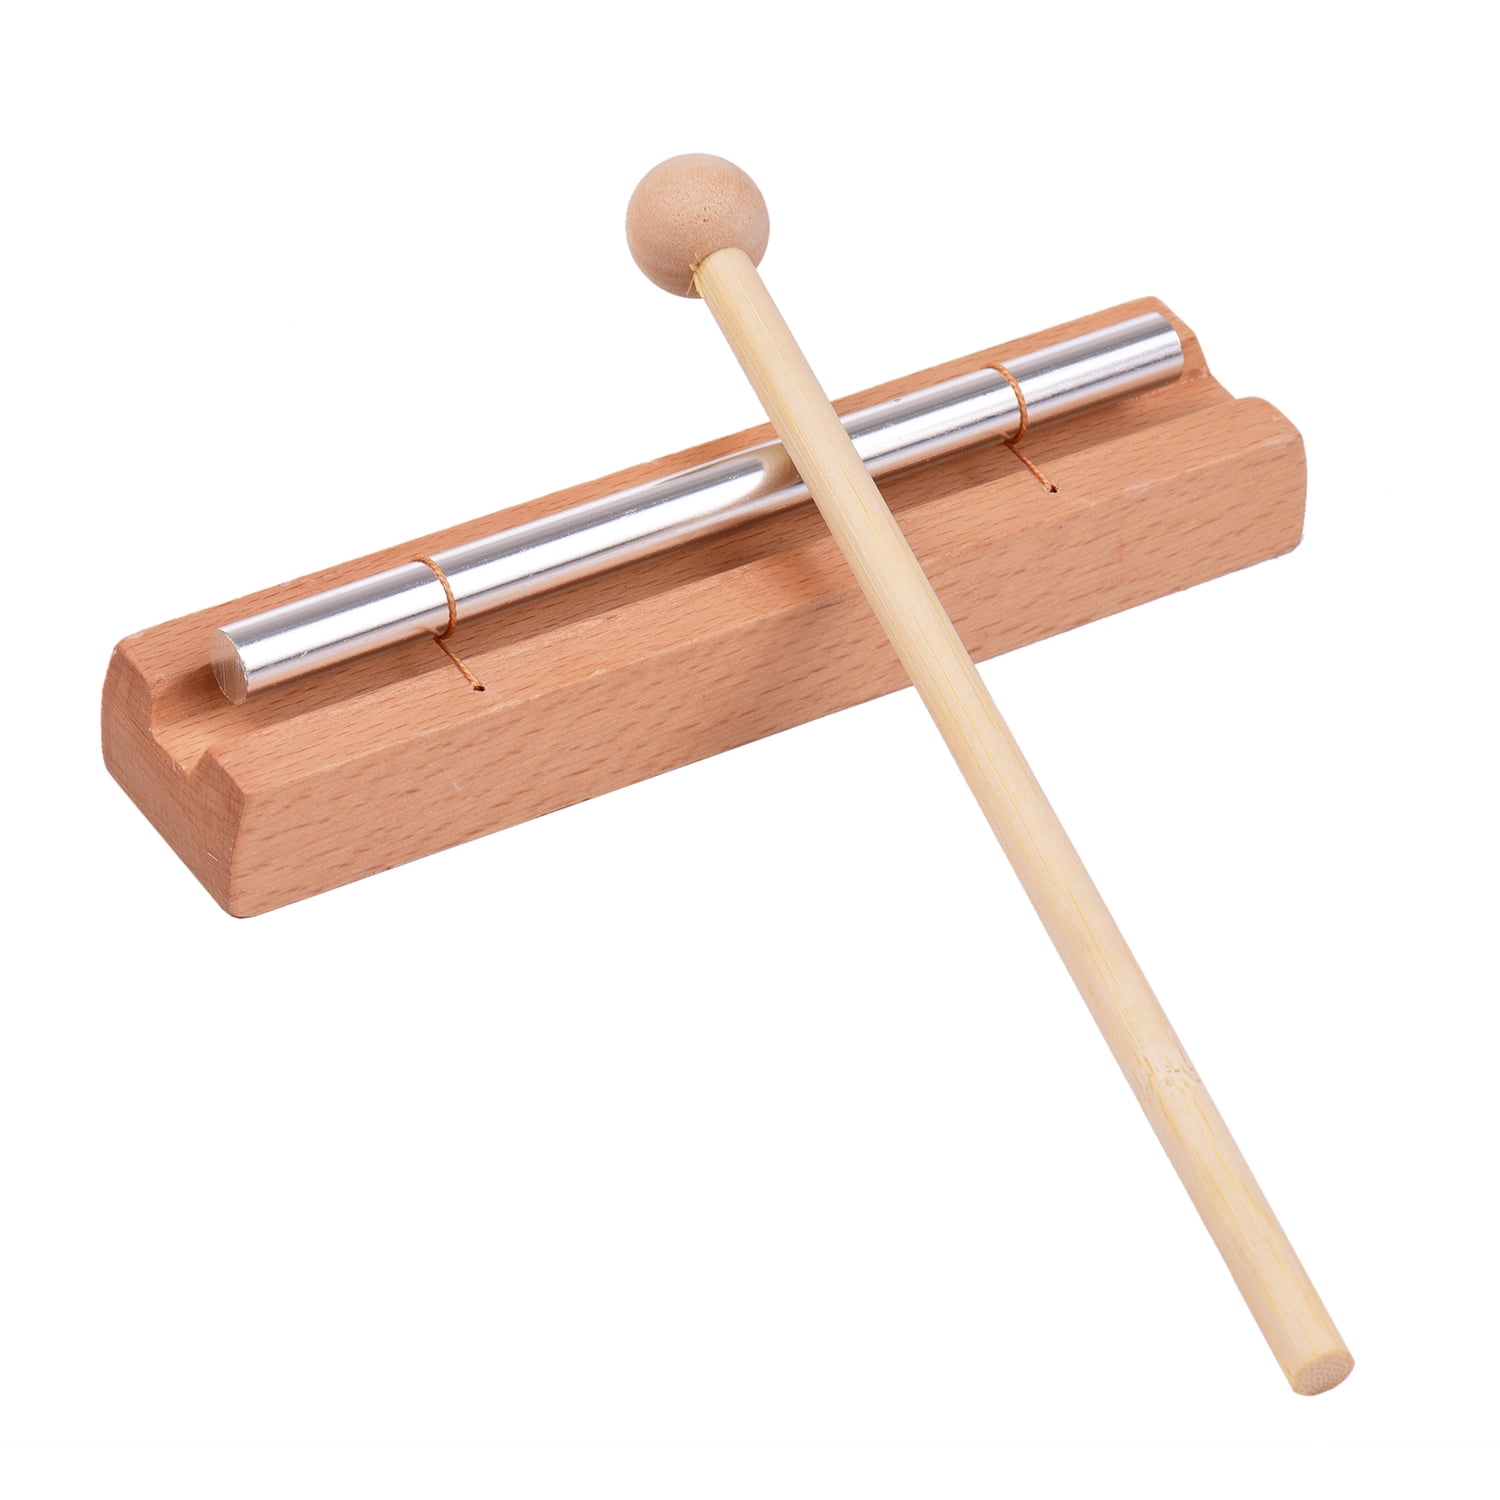 Musical Early Education Meditation 1 Tone Energy Chimes Sound Bar Drum Hand Percussion Instruments for Yoga Class Management Chime Gong Glockenspiel 